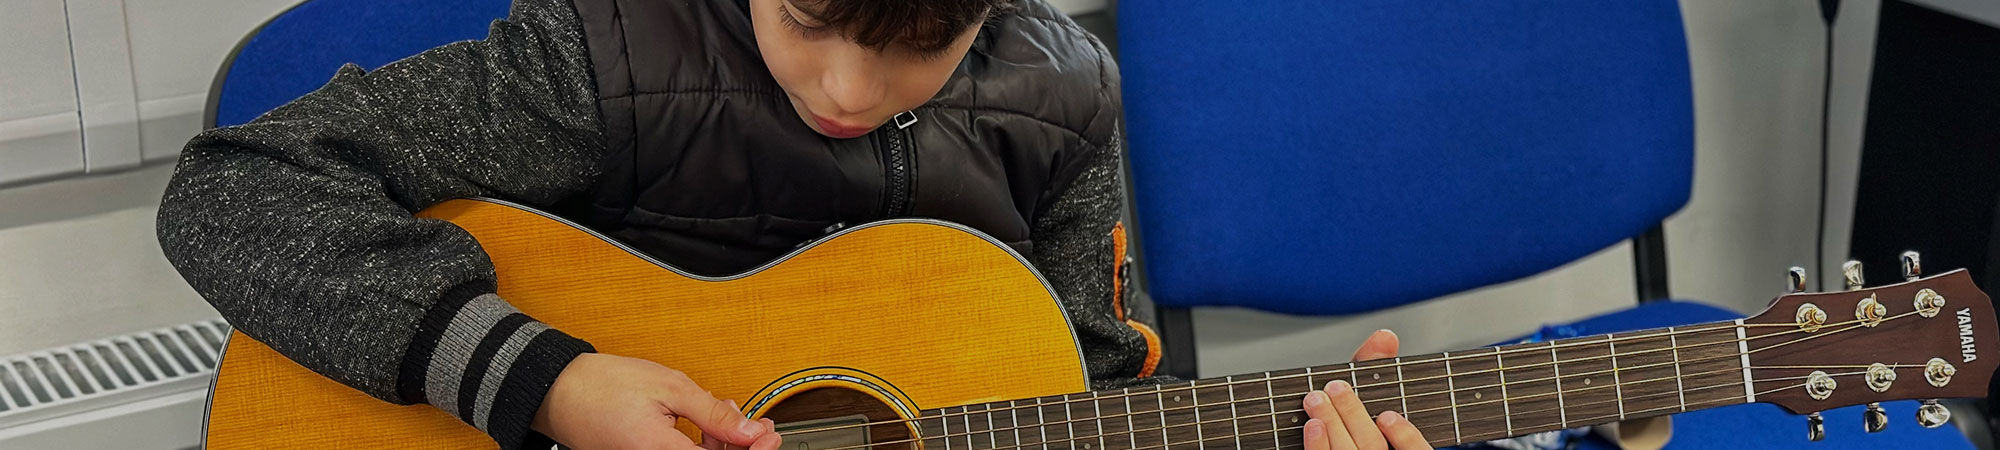 Boy playing acoustic guitar